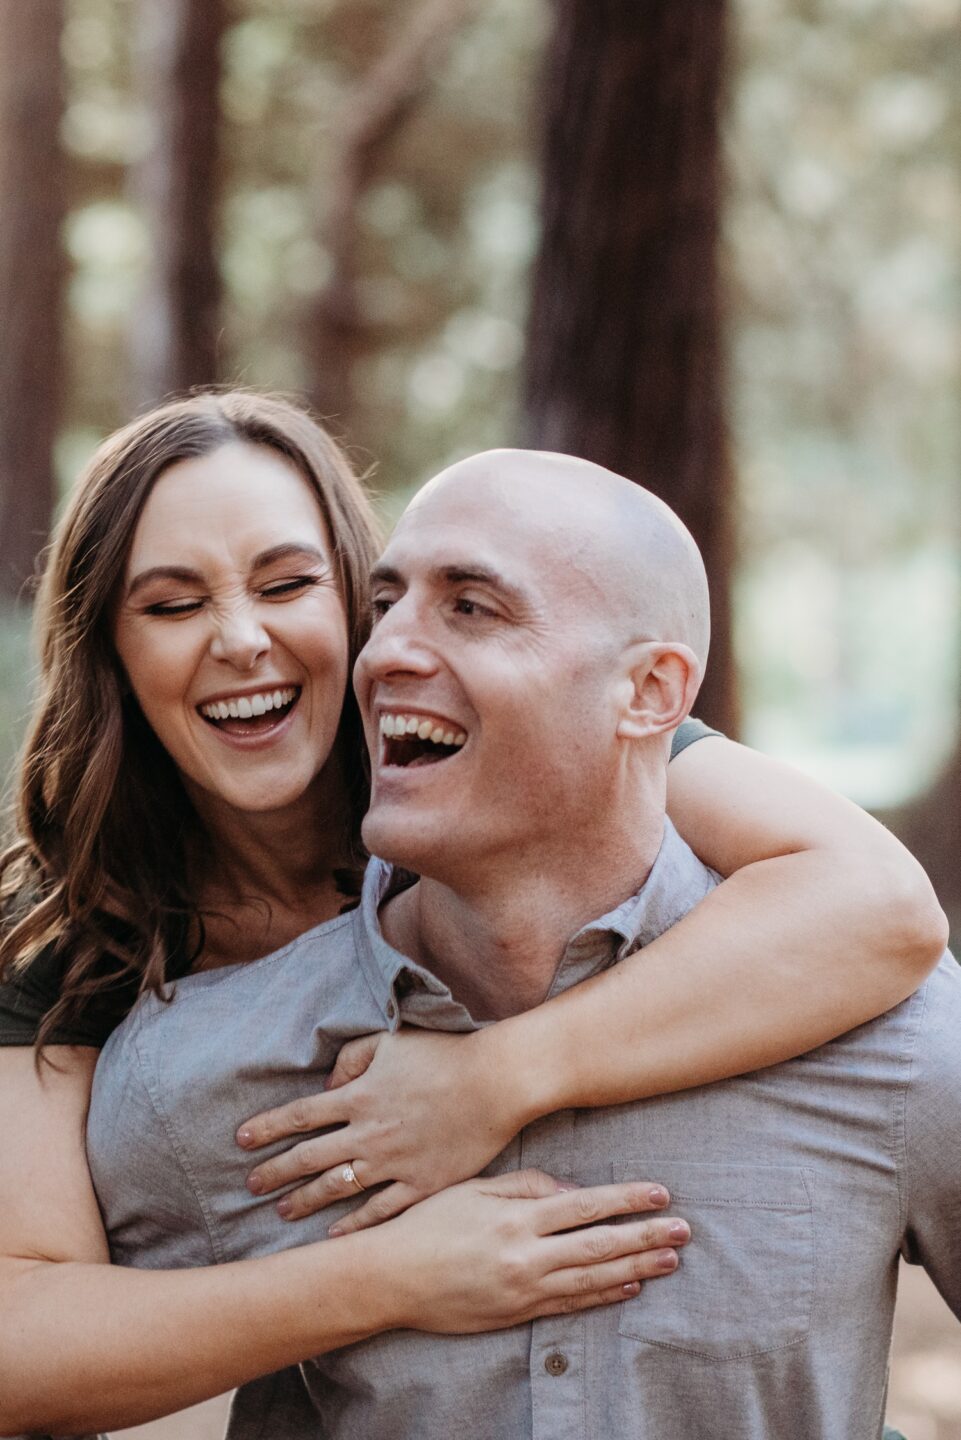 Woman goes on piggyback ride while smiling at her smiling fiance on their Golden Gate Park engagement photoshoot.